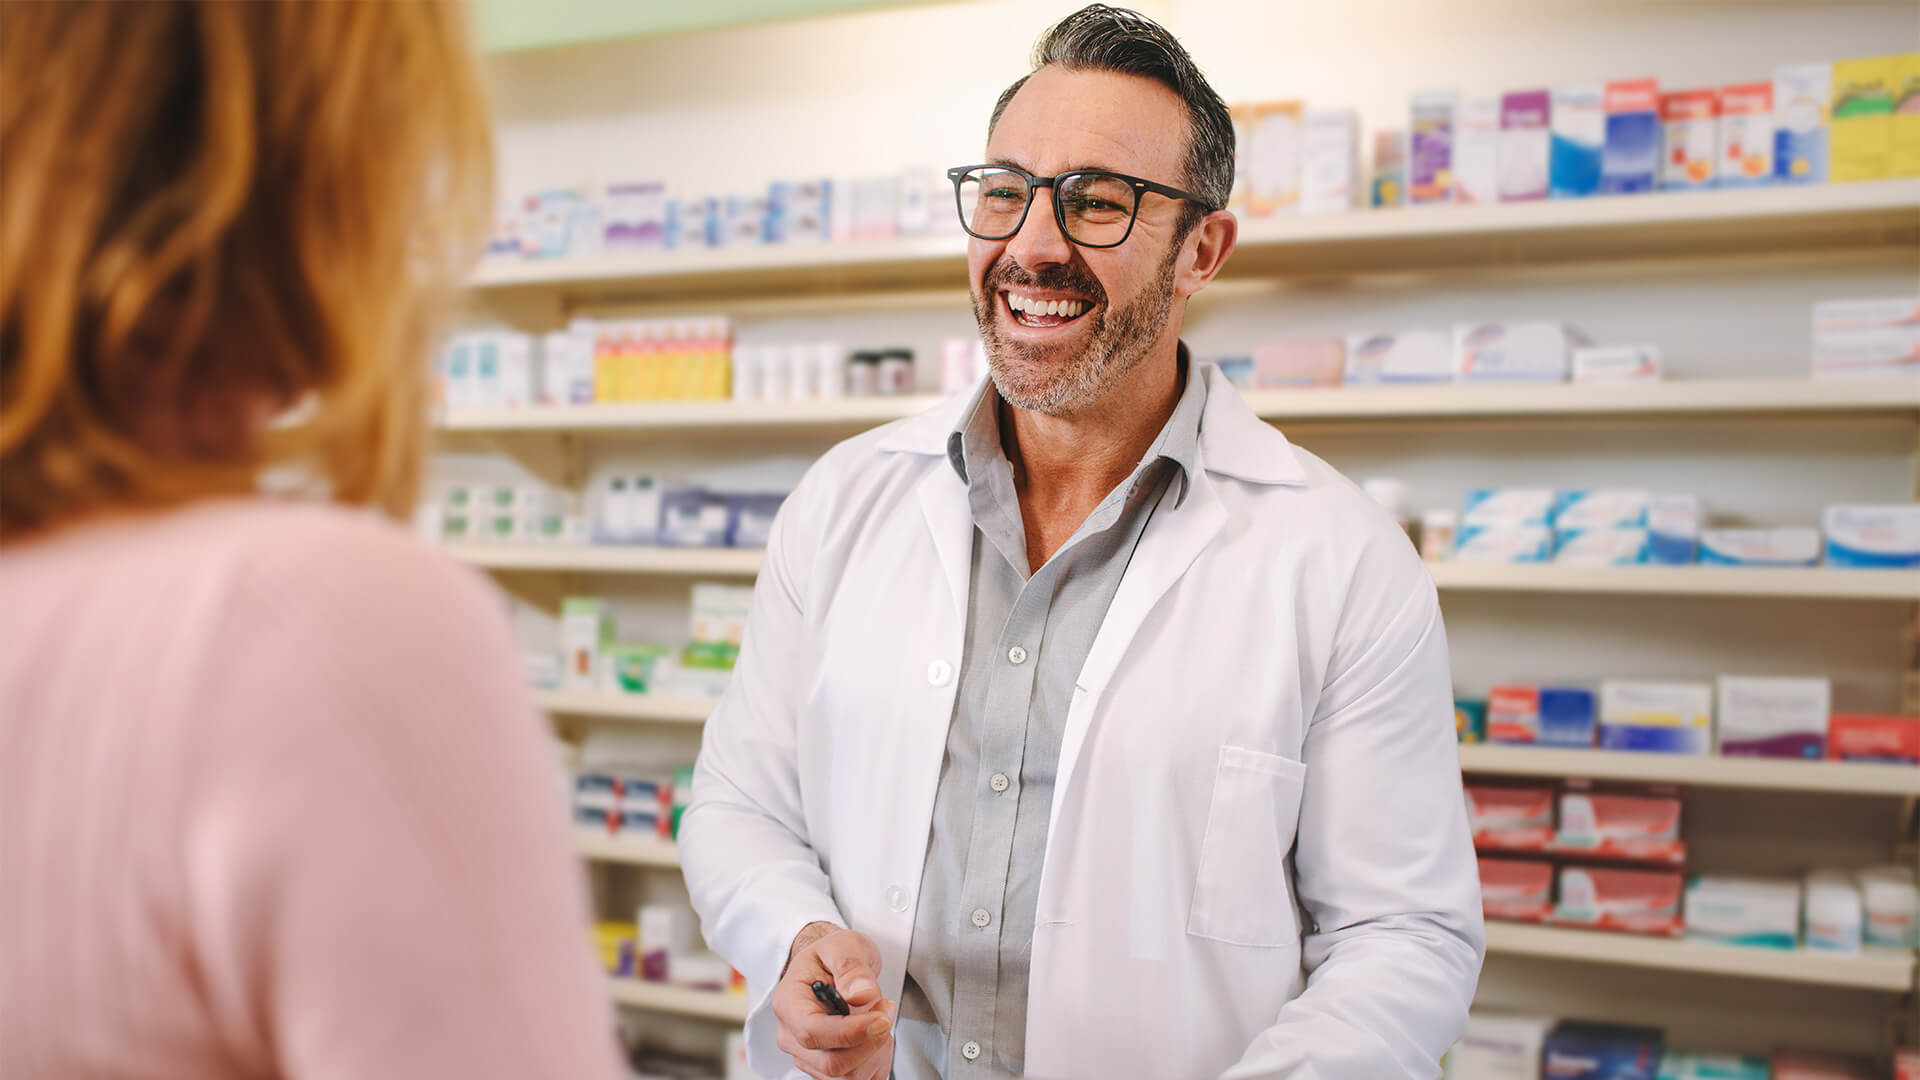 Helpful pharmacist dealing with a woman customer